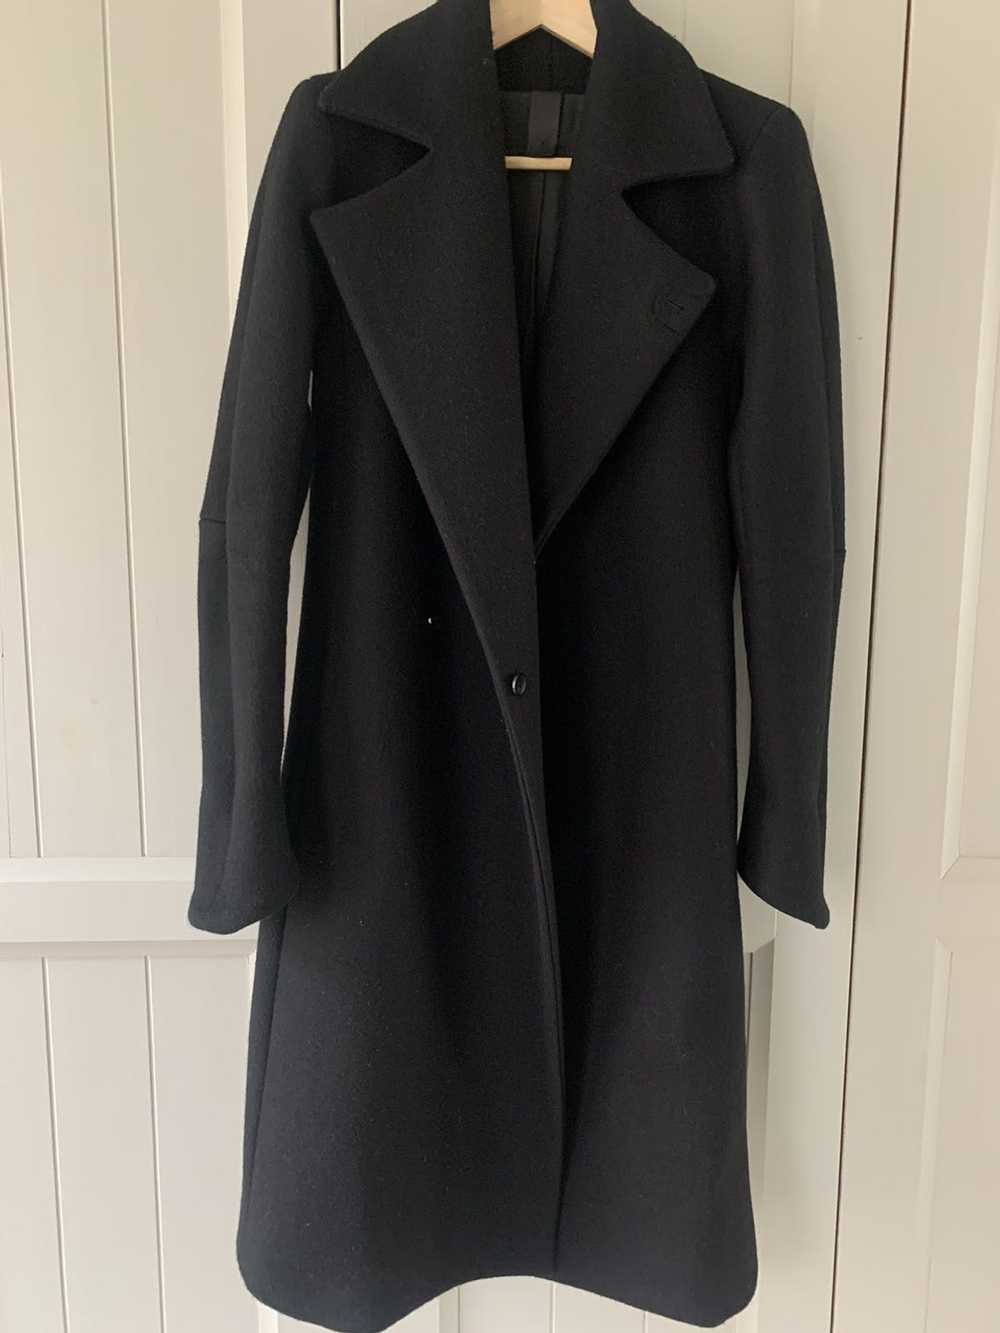 Y/Project Black peacoat y/project size 44 - image 1